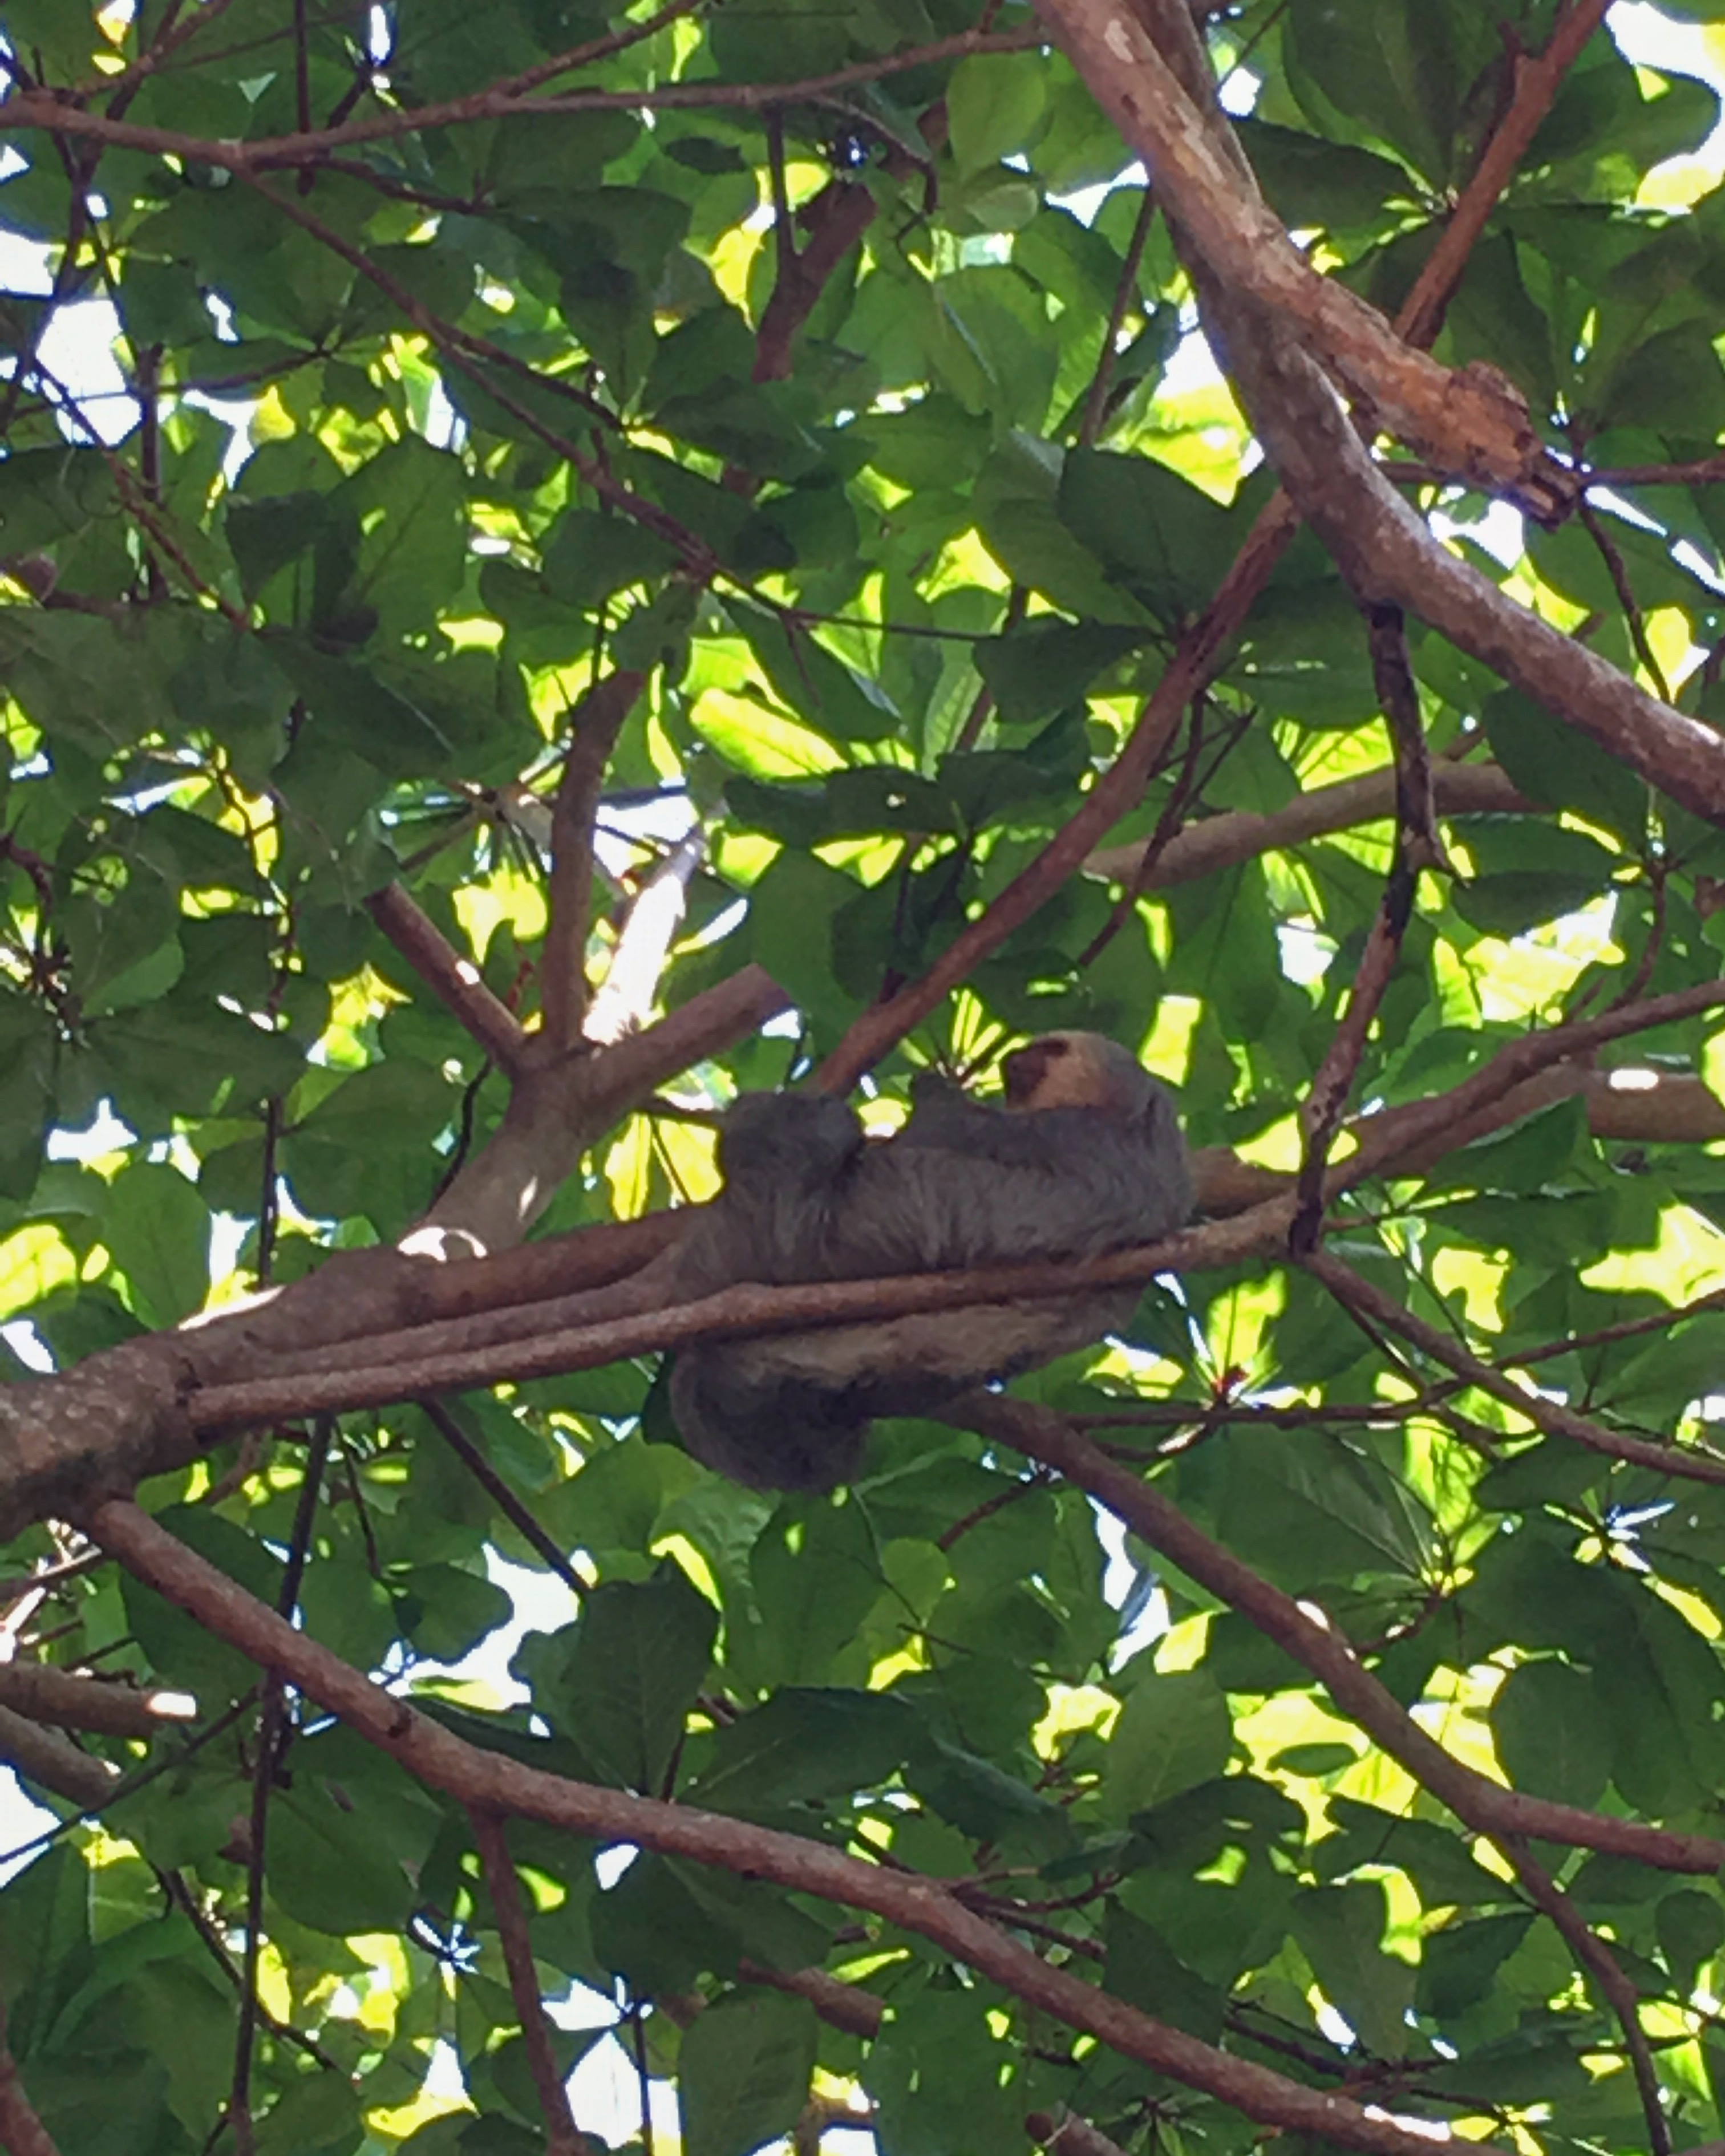 A sloth relaxing up in the tree